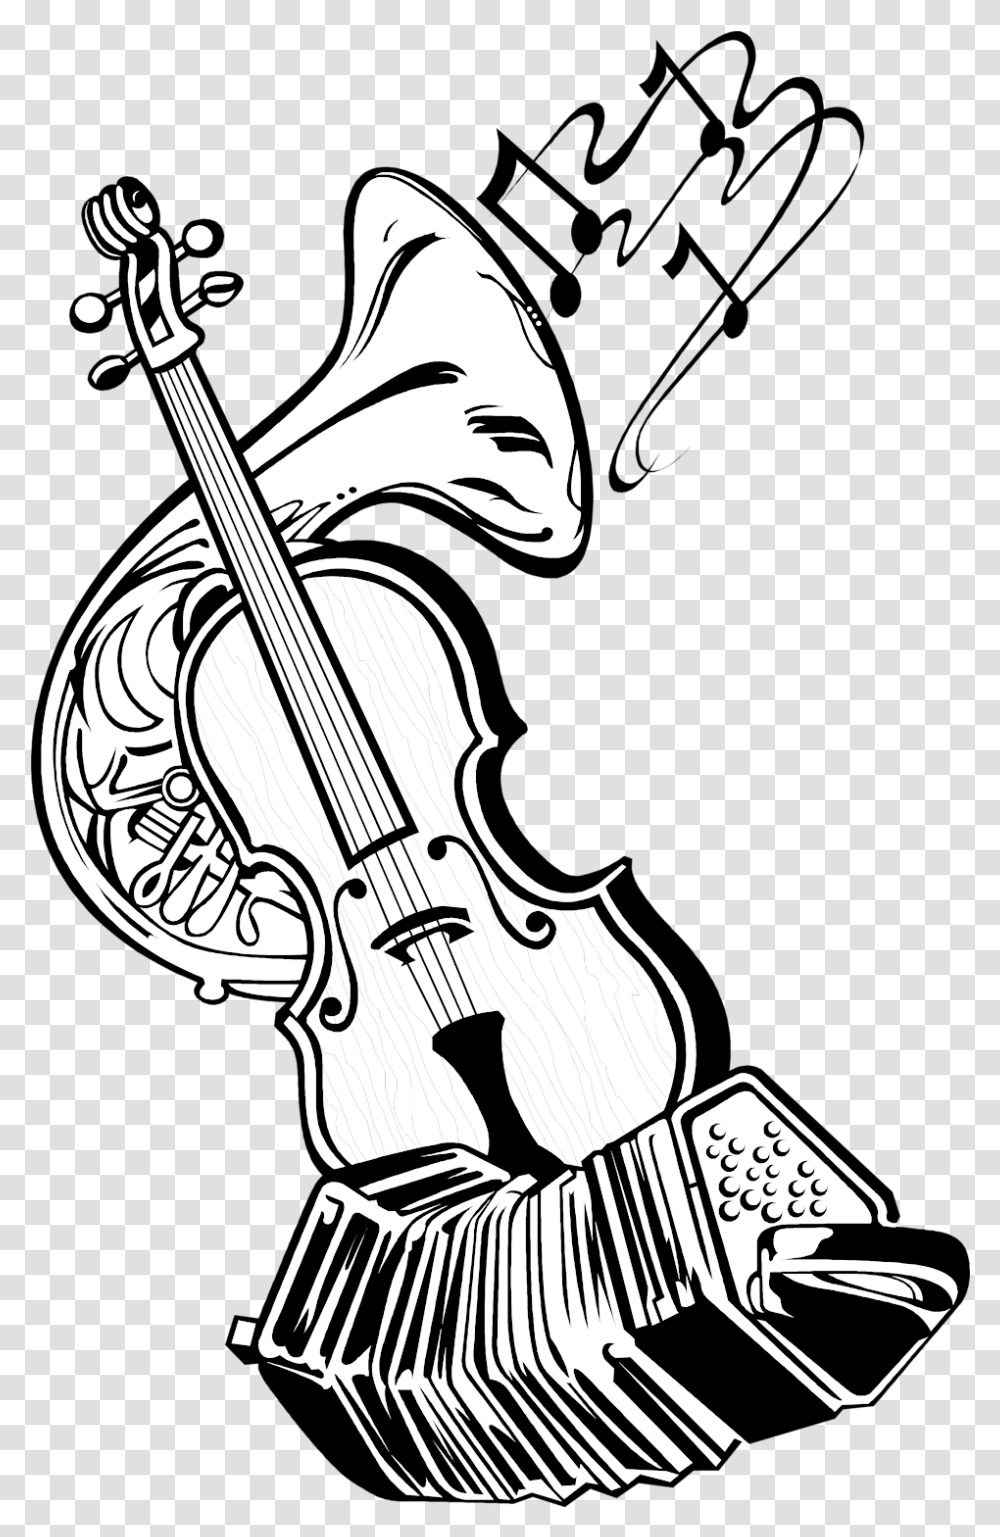 Musical Instruments Drawings Of Music Instrument, Leisure Activities, Violin, Viola, Fiddle Transparent Png